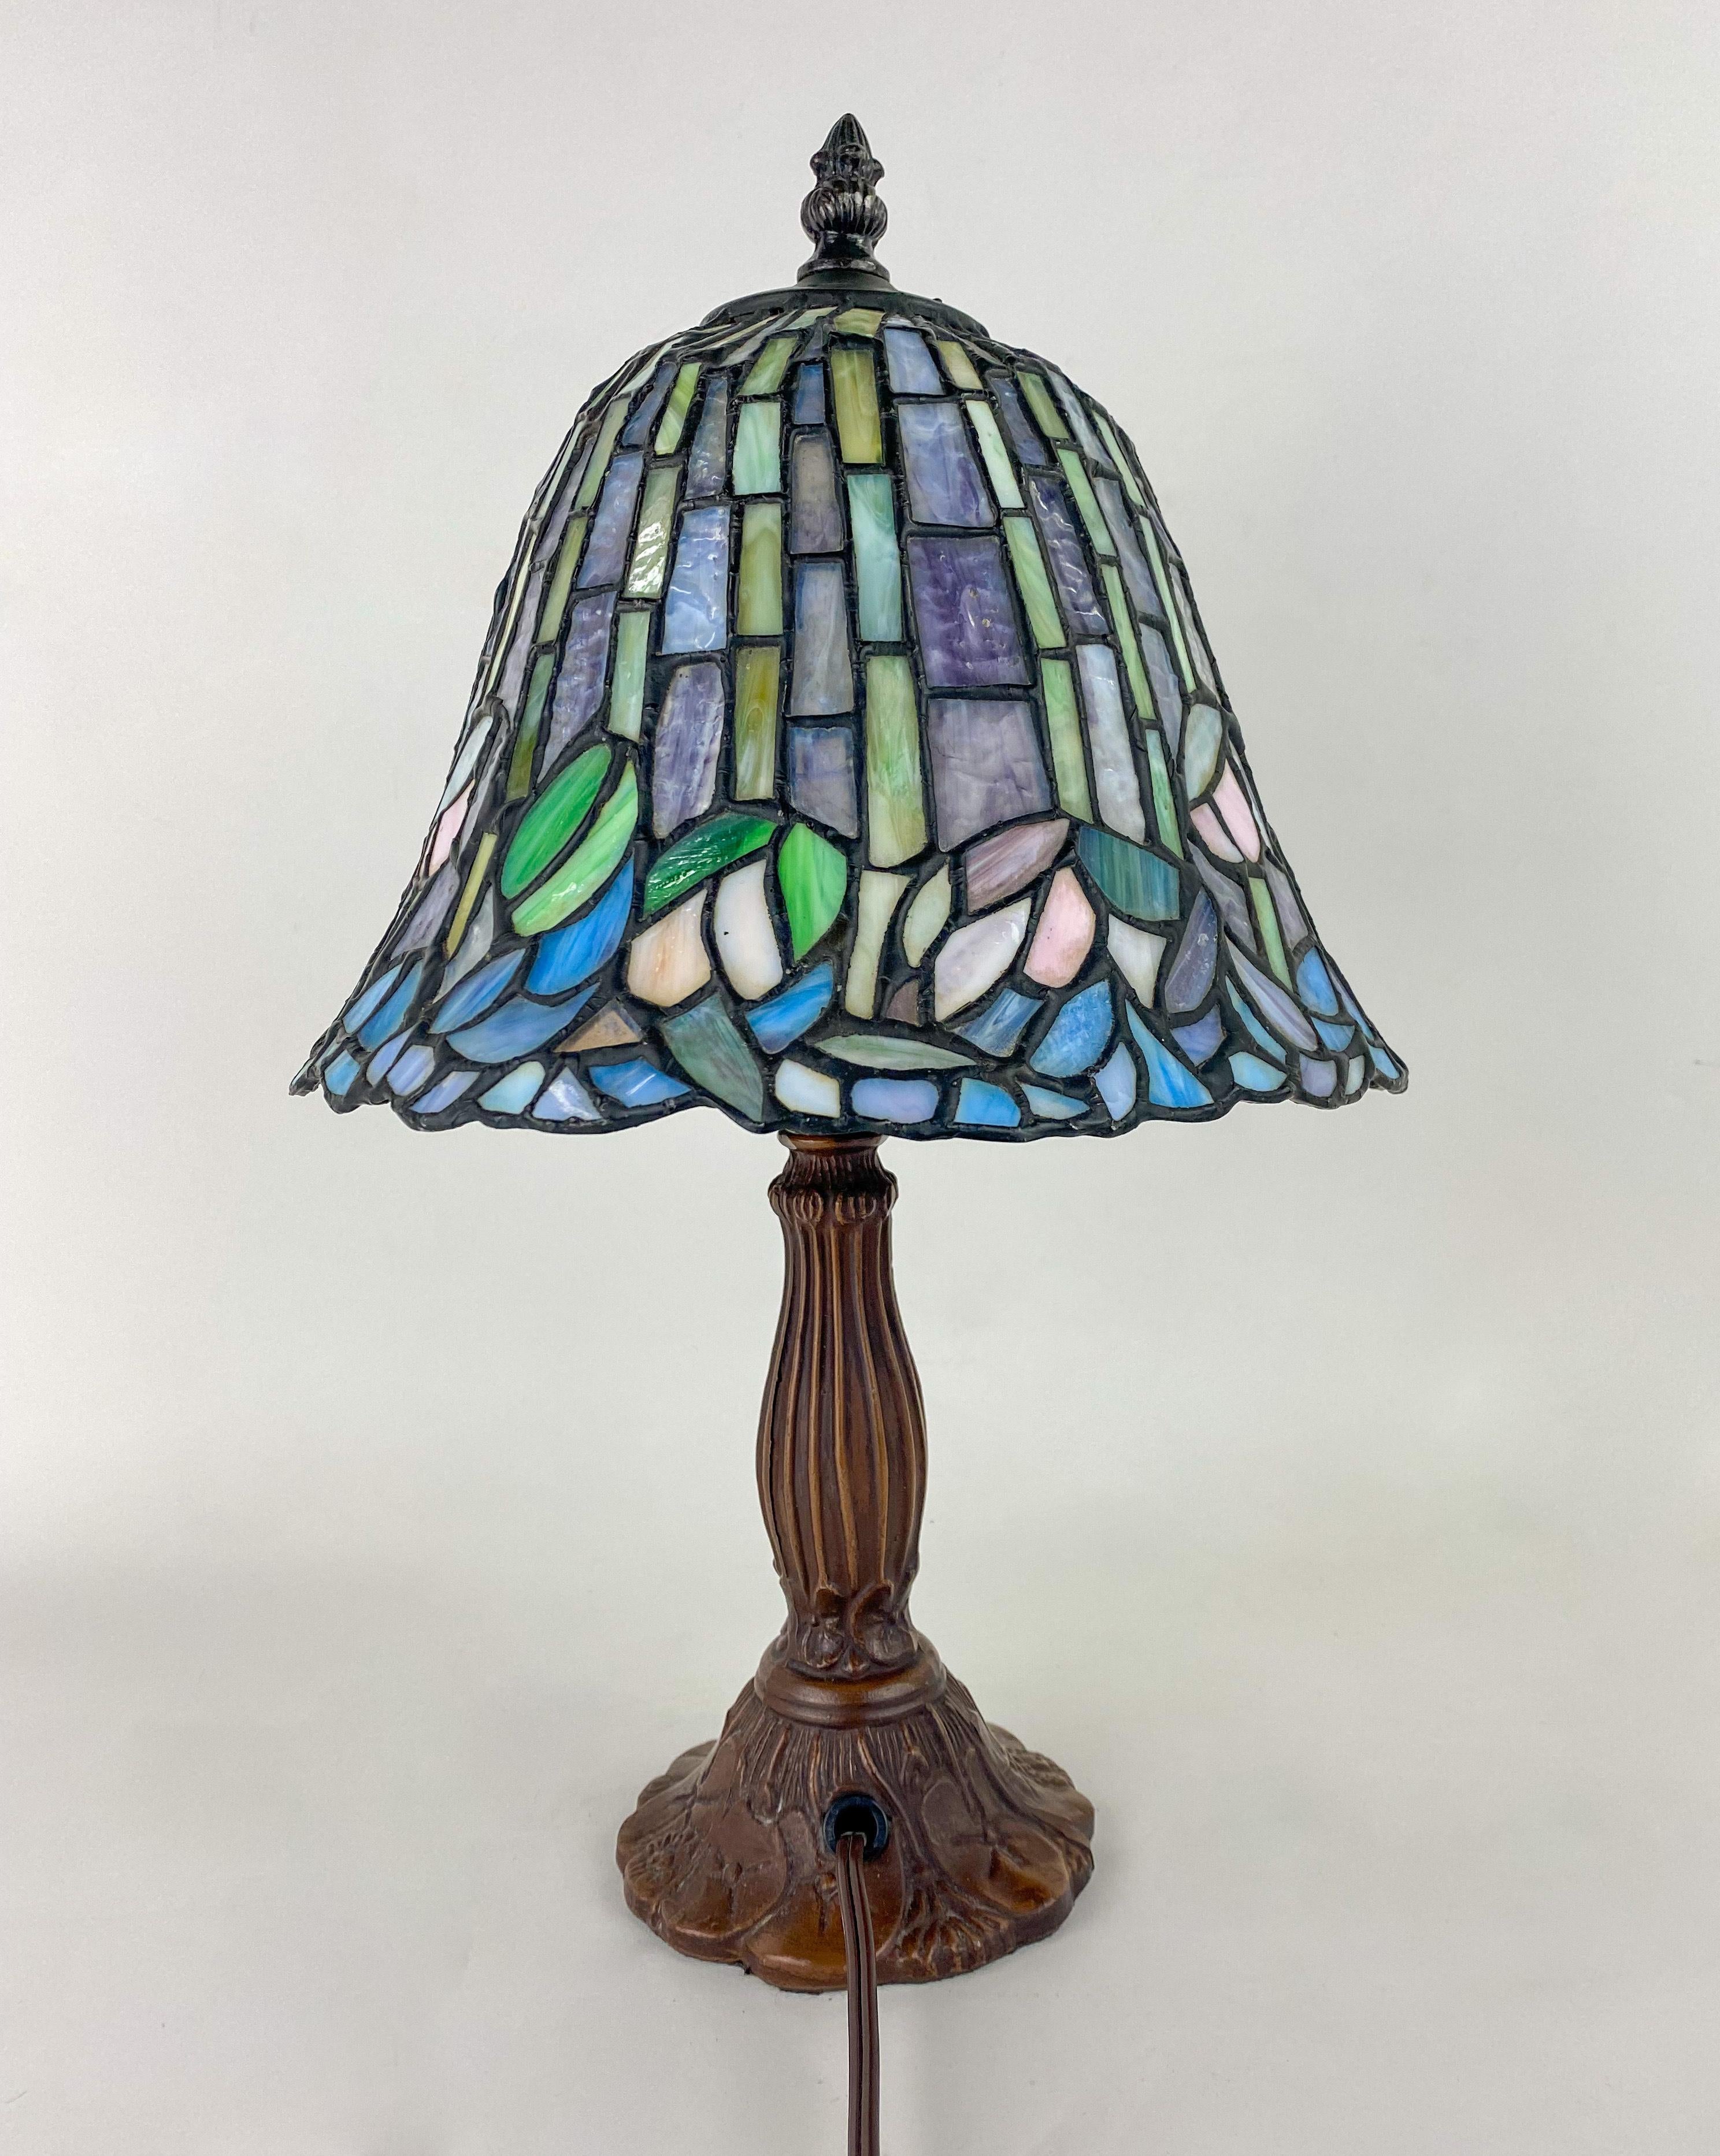 A timeless Tiffany style table lamp. The lamp features multicolor stained glass shade in green, blue, turquoise, purple and pink. The hand cut glass pieces form a beautiful wisteria flower design. The beautiful shade is attached to a patinated